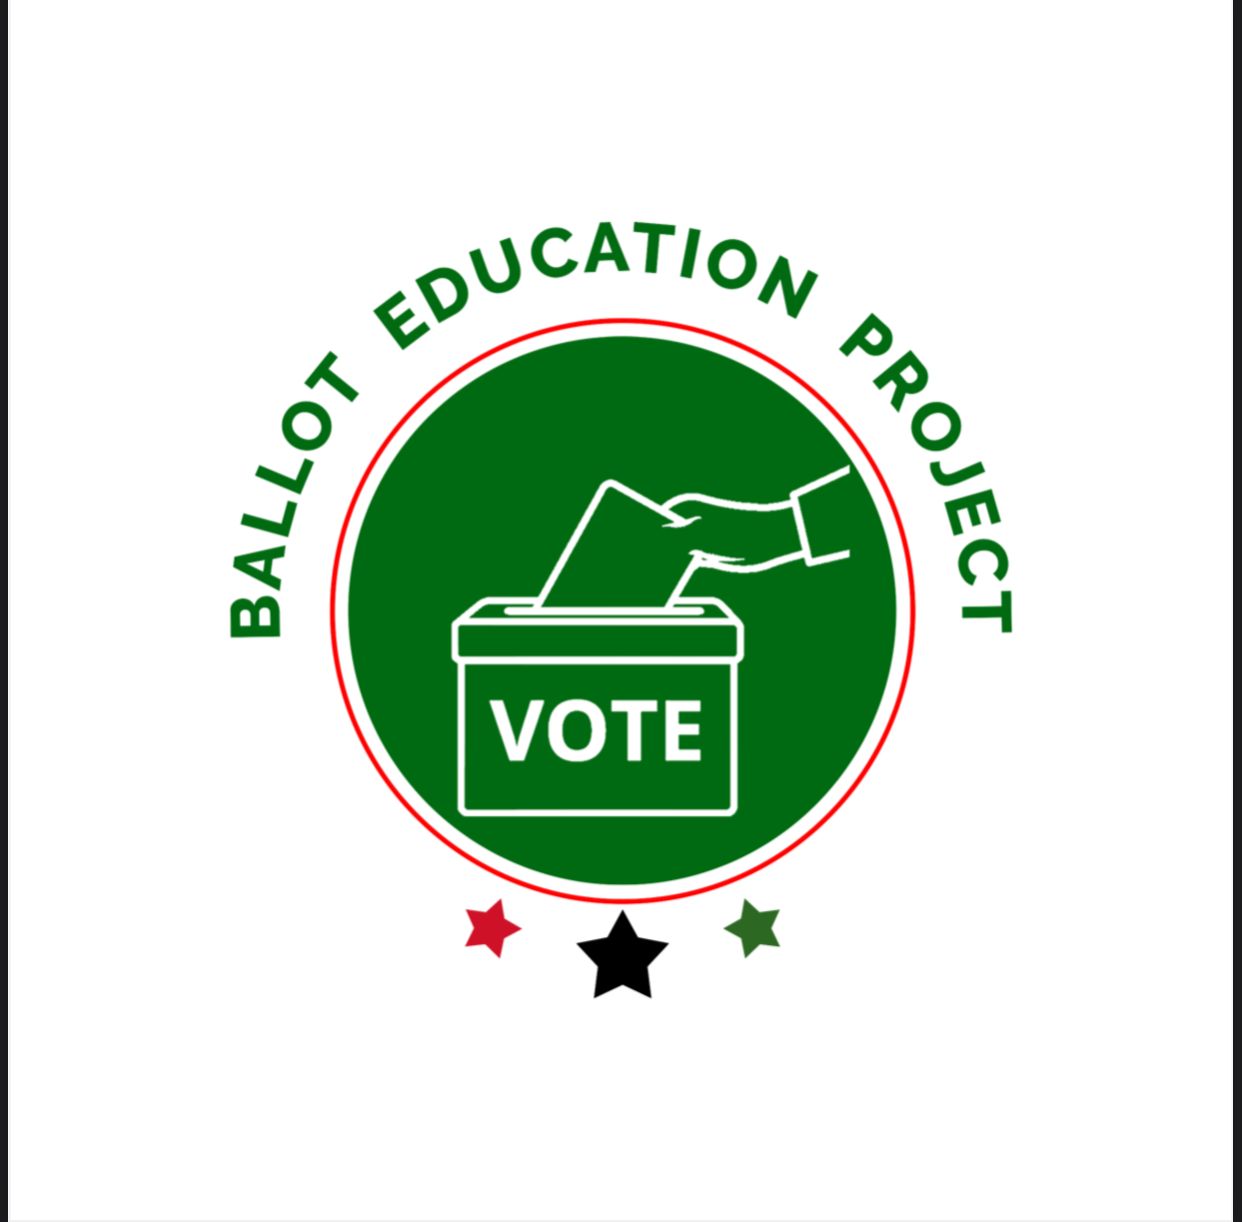 Voter Registration: Ballot Education Project kicks against EC’s decision to register new voters at its district offices